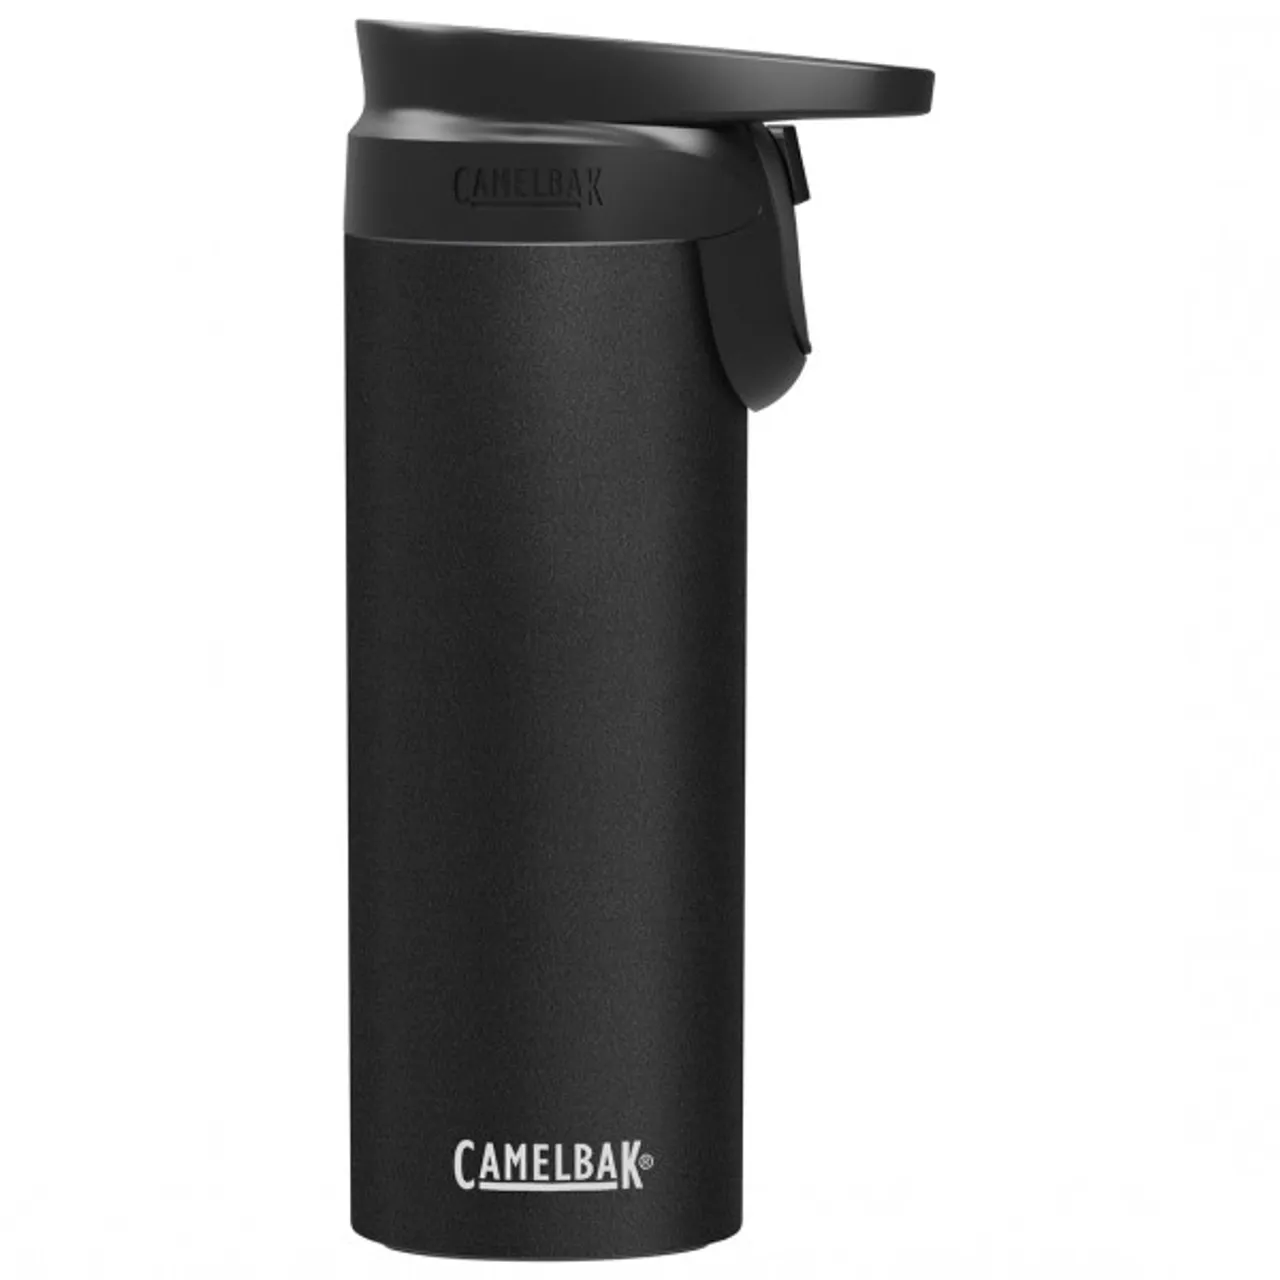 Camelbak - Forge Flow Sst Vacuum Insulated 16oz - Water bottle size 500 ml, black